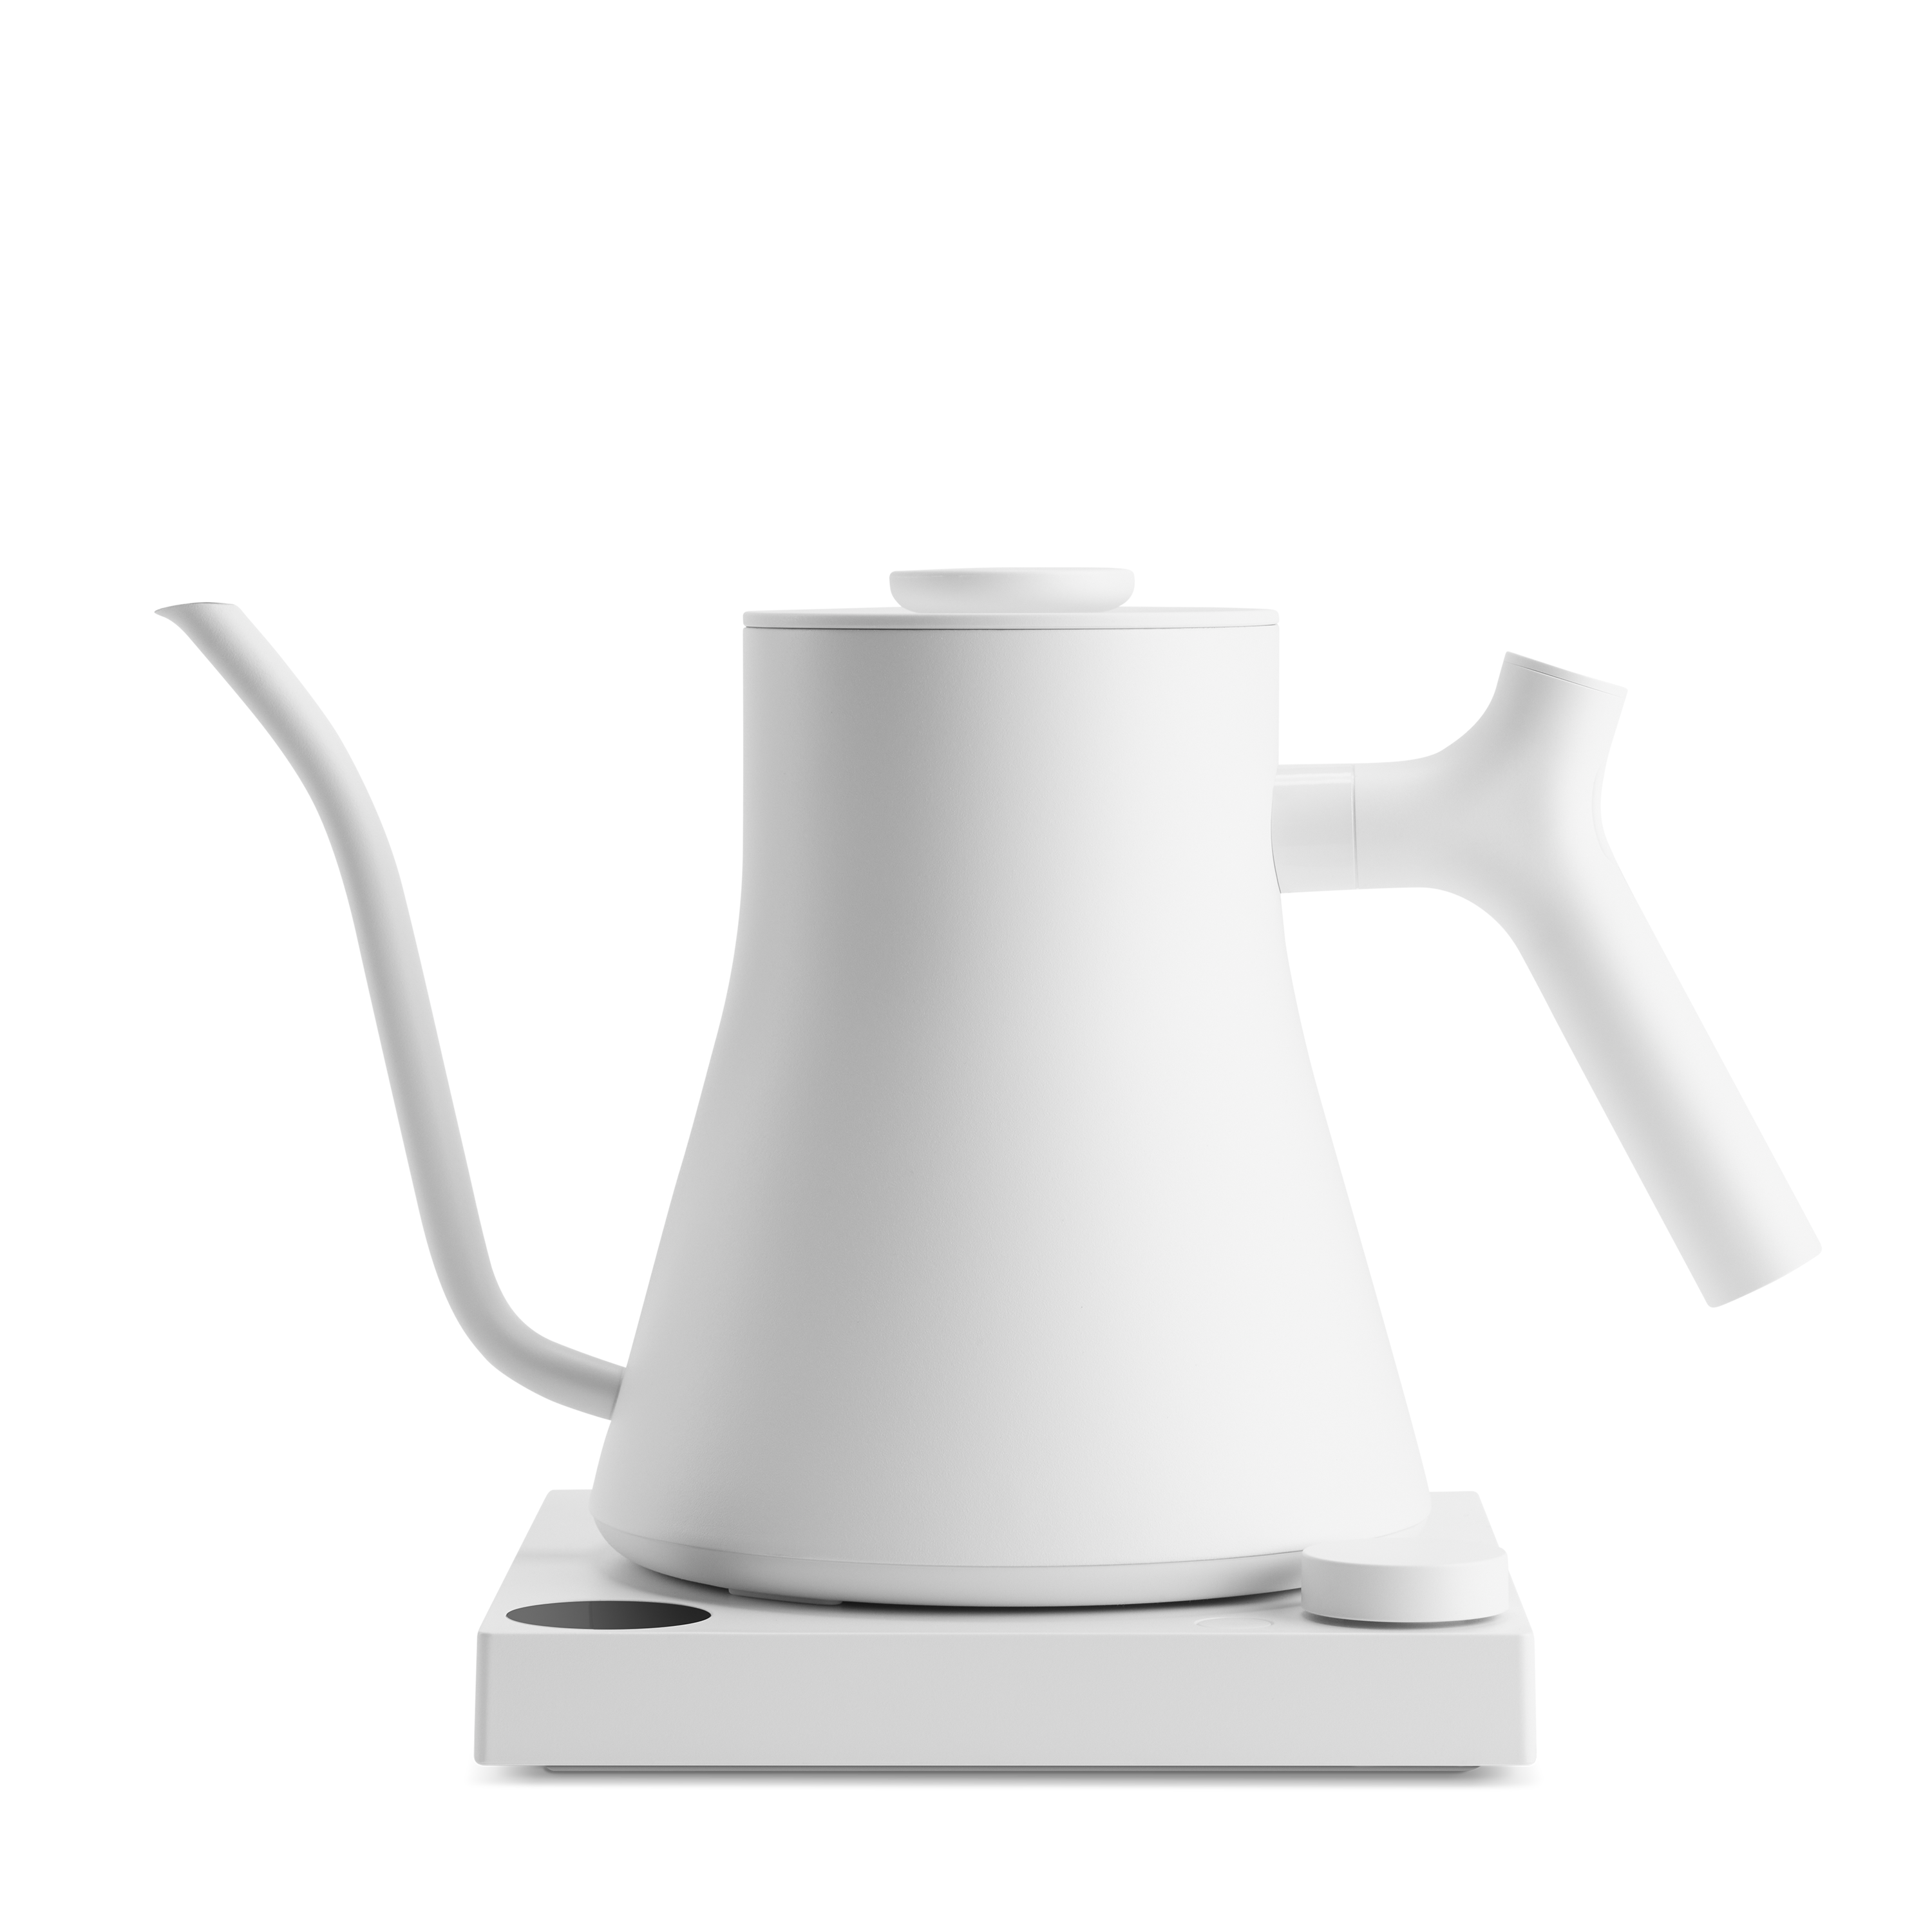 Stagg EKG Temperature-Control Pour-Over Electric Kettle – MoMA Design Store